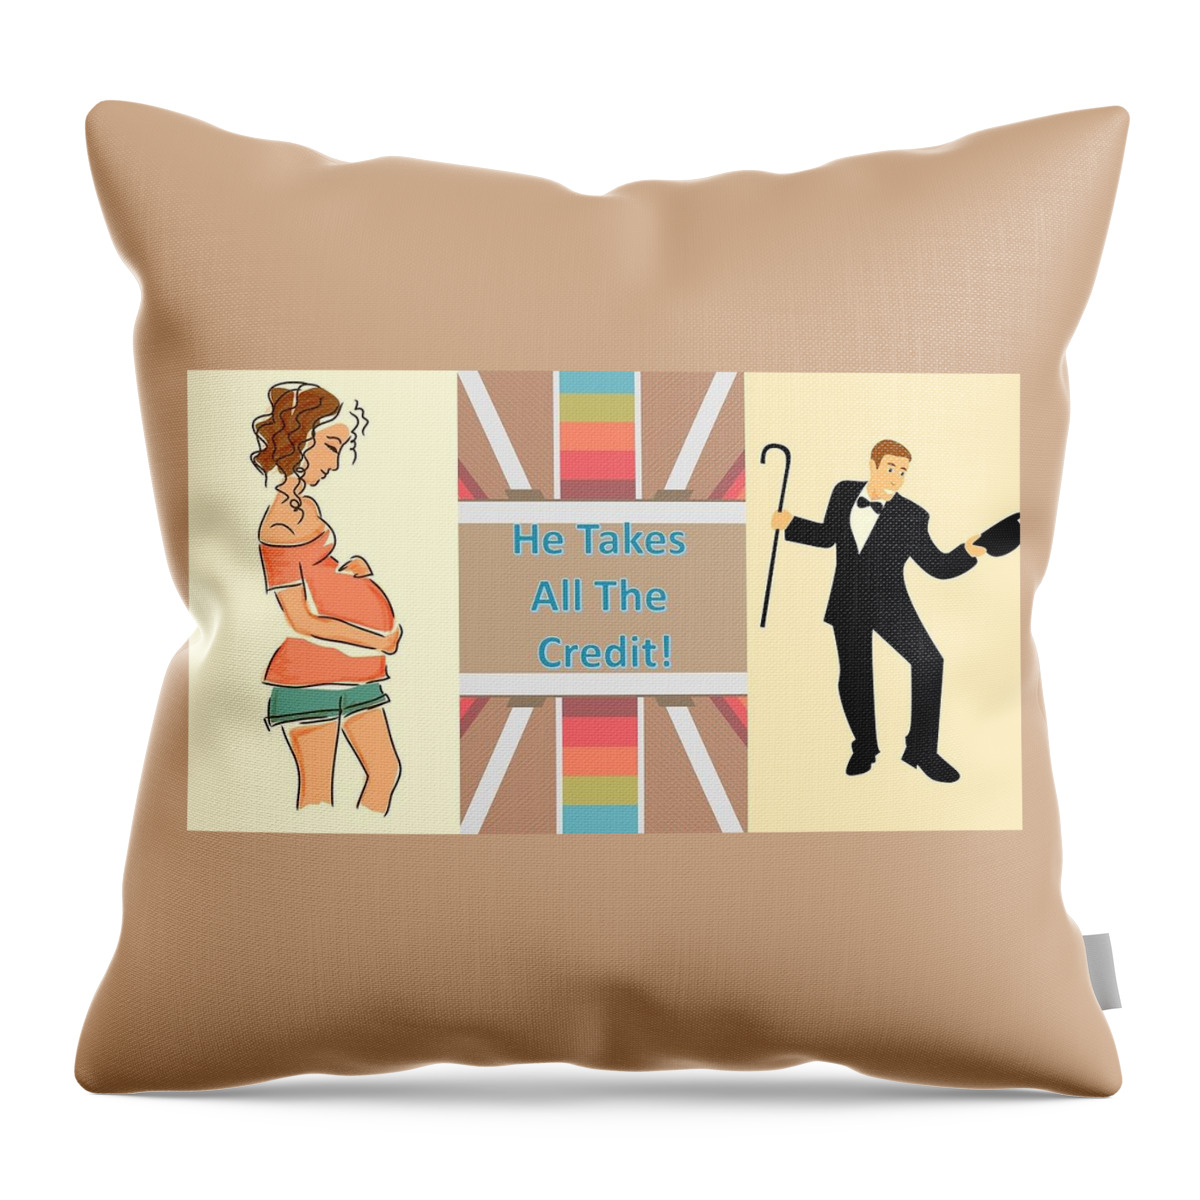 Pregnant Throw Pillow featuring the mixed media He Takes All The Credit by Nancy Ayanna Wyatt